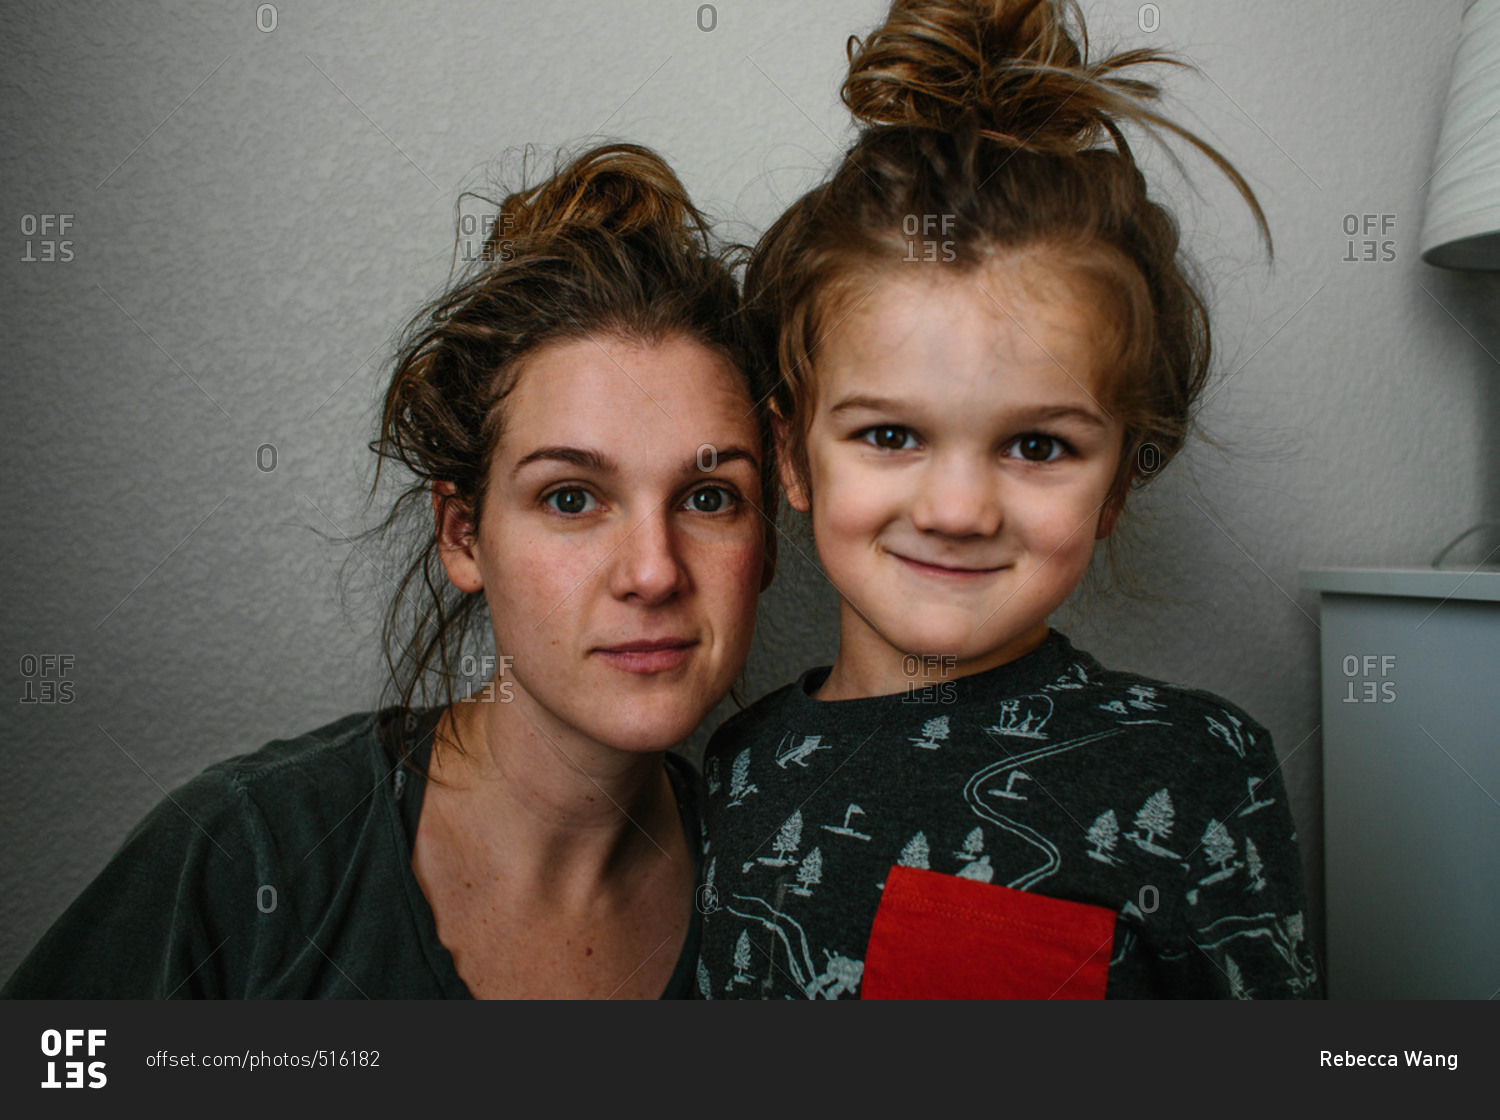 Mother and son with hair in messy buns